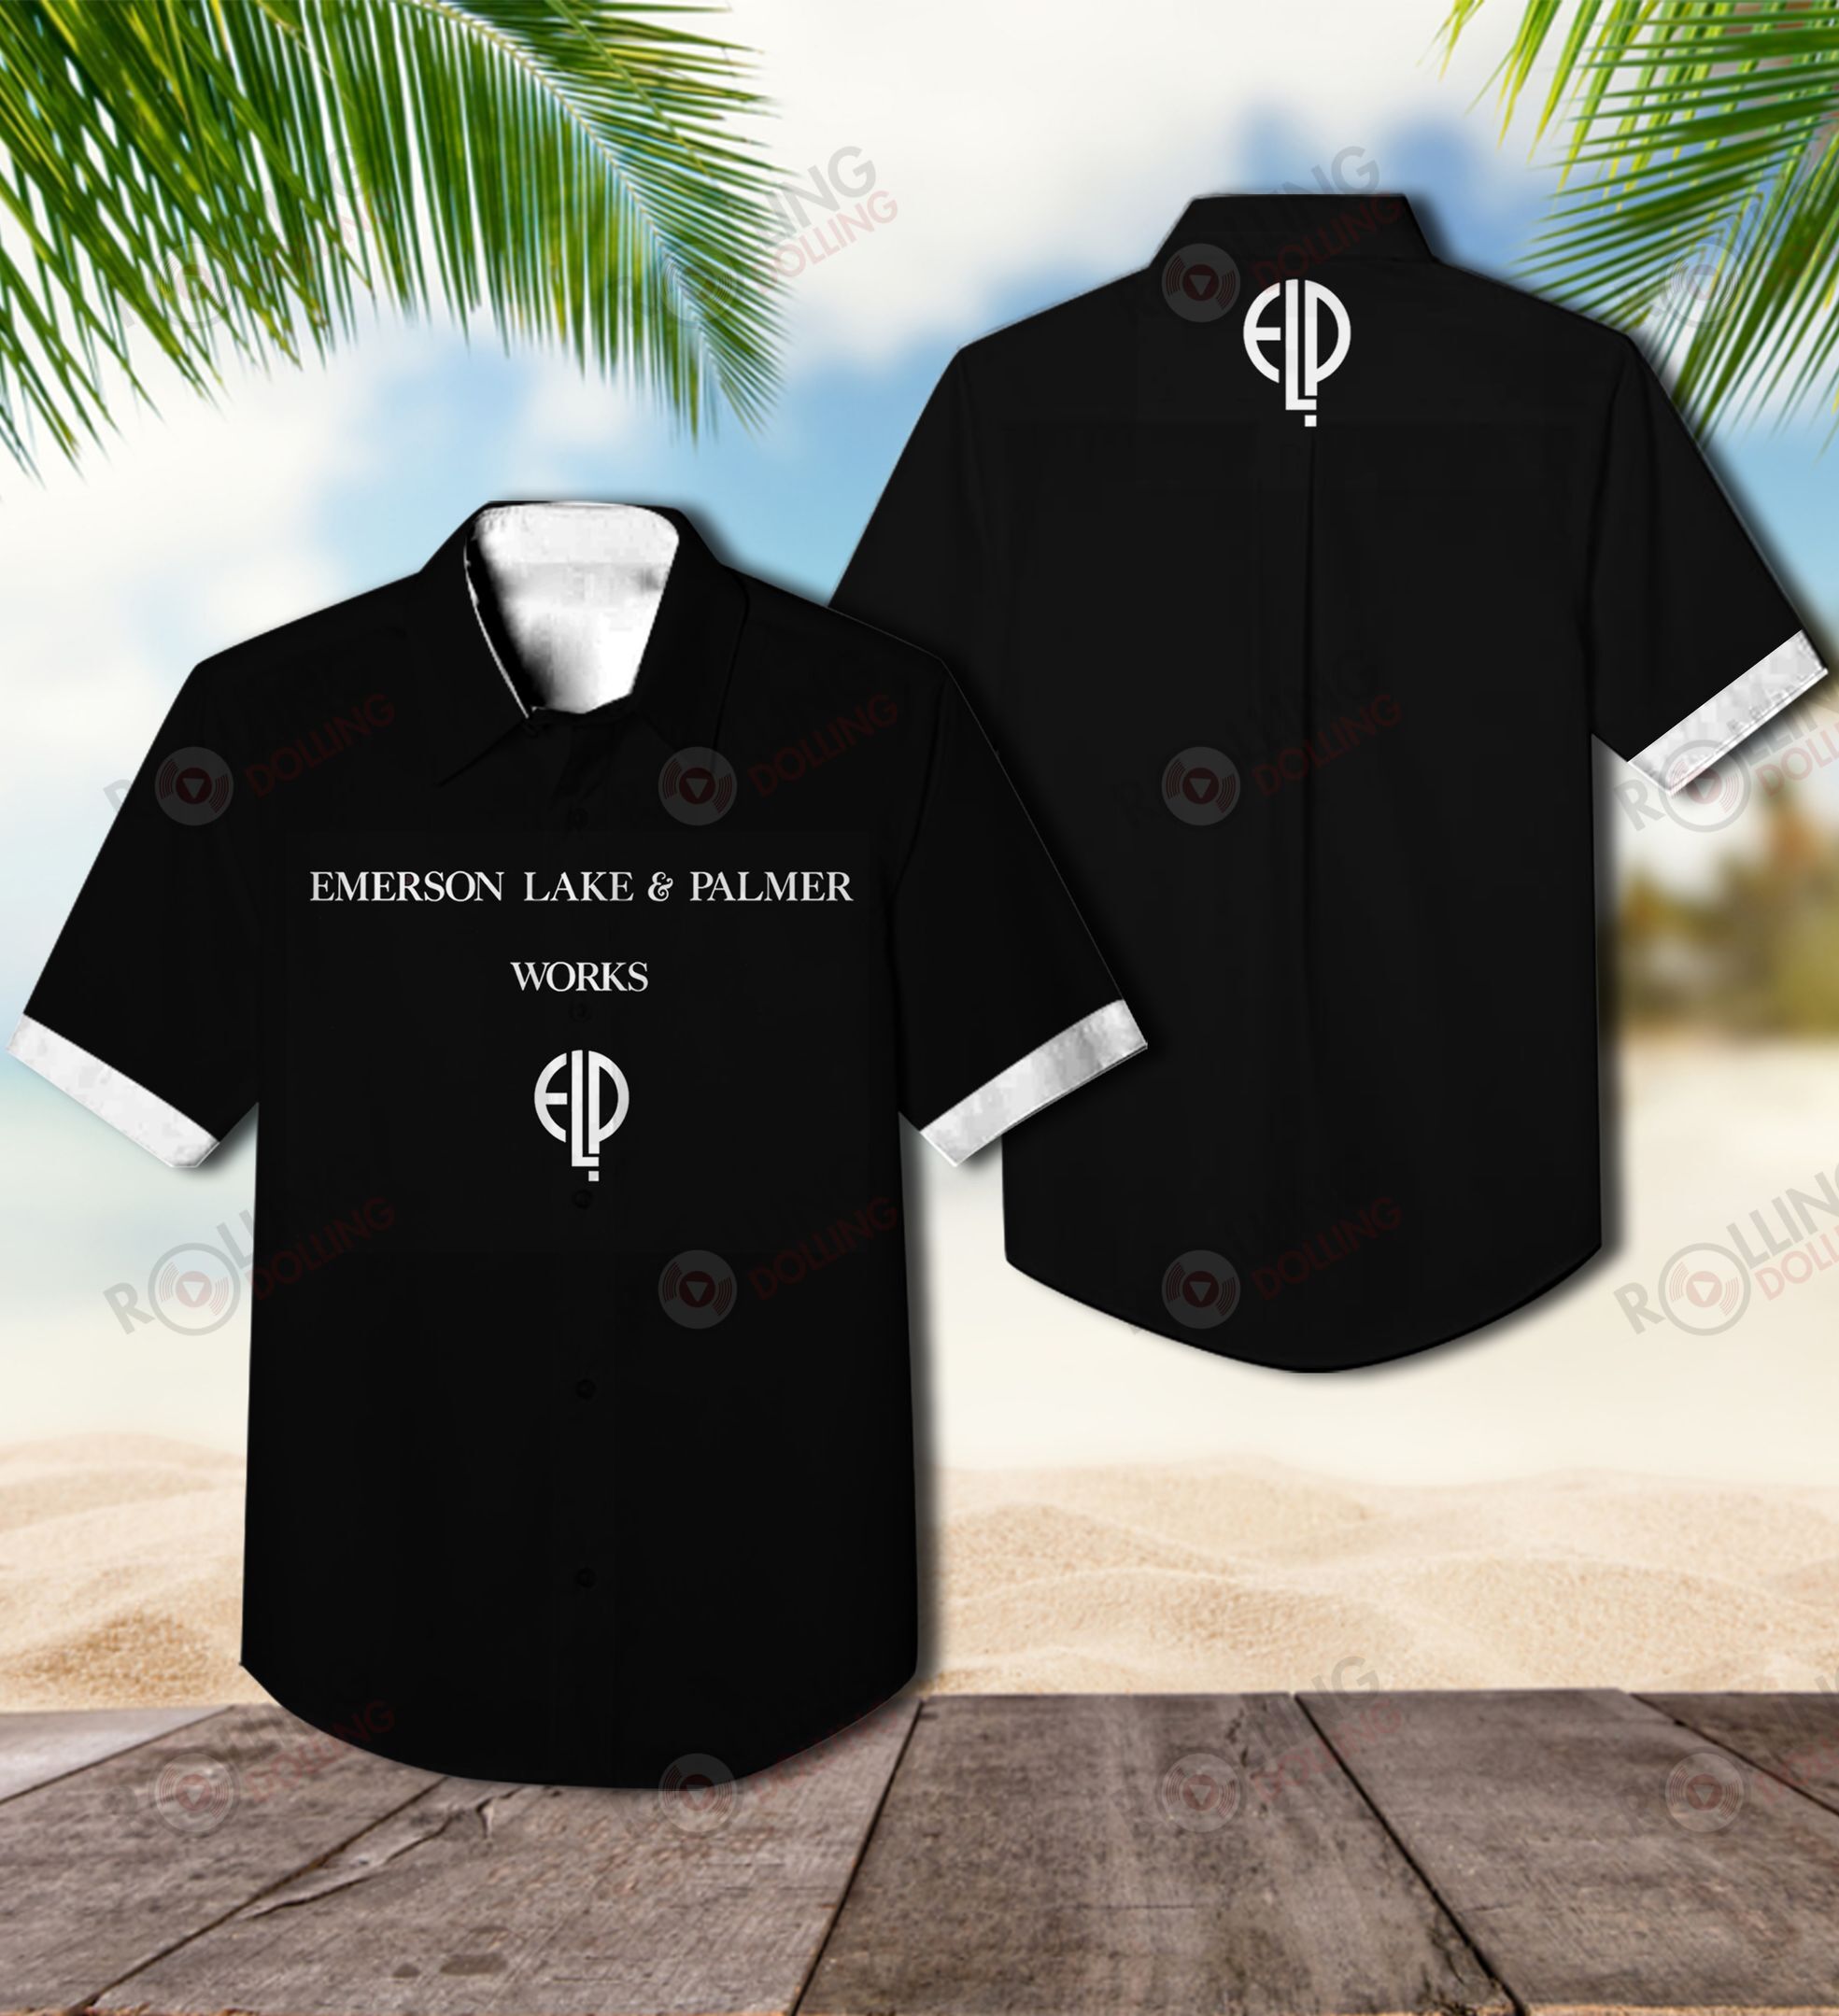 This would make a great gift for any fan who loves Hawaiian Shirt as well as Rock band 50